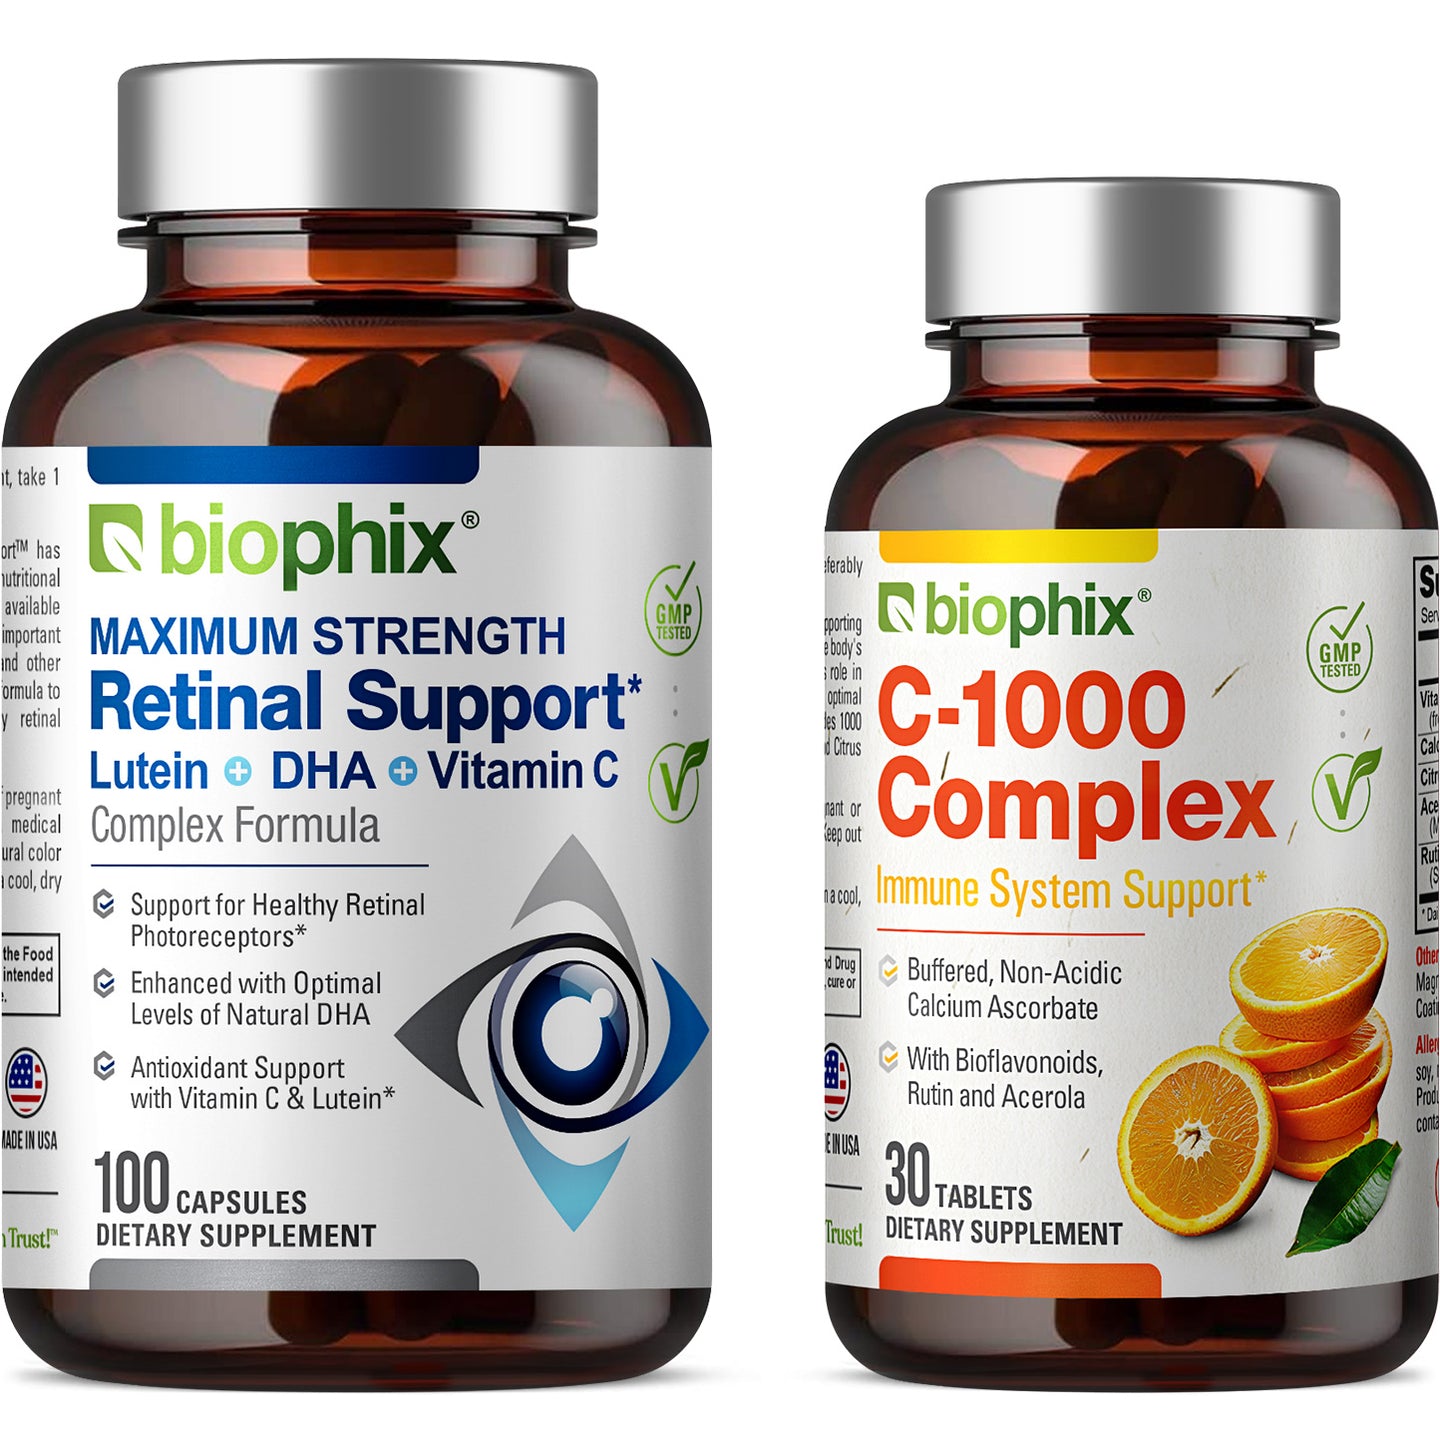 biophix Retinal Support Maximum Strength Complex Formula 100 Capsules with Free C-1000 30 Tablets